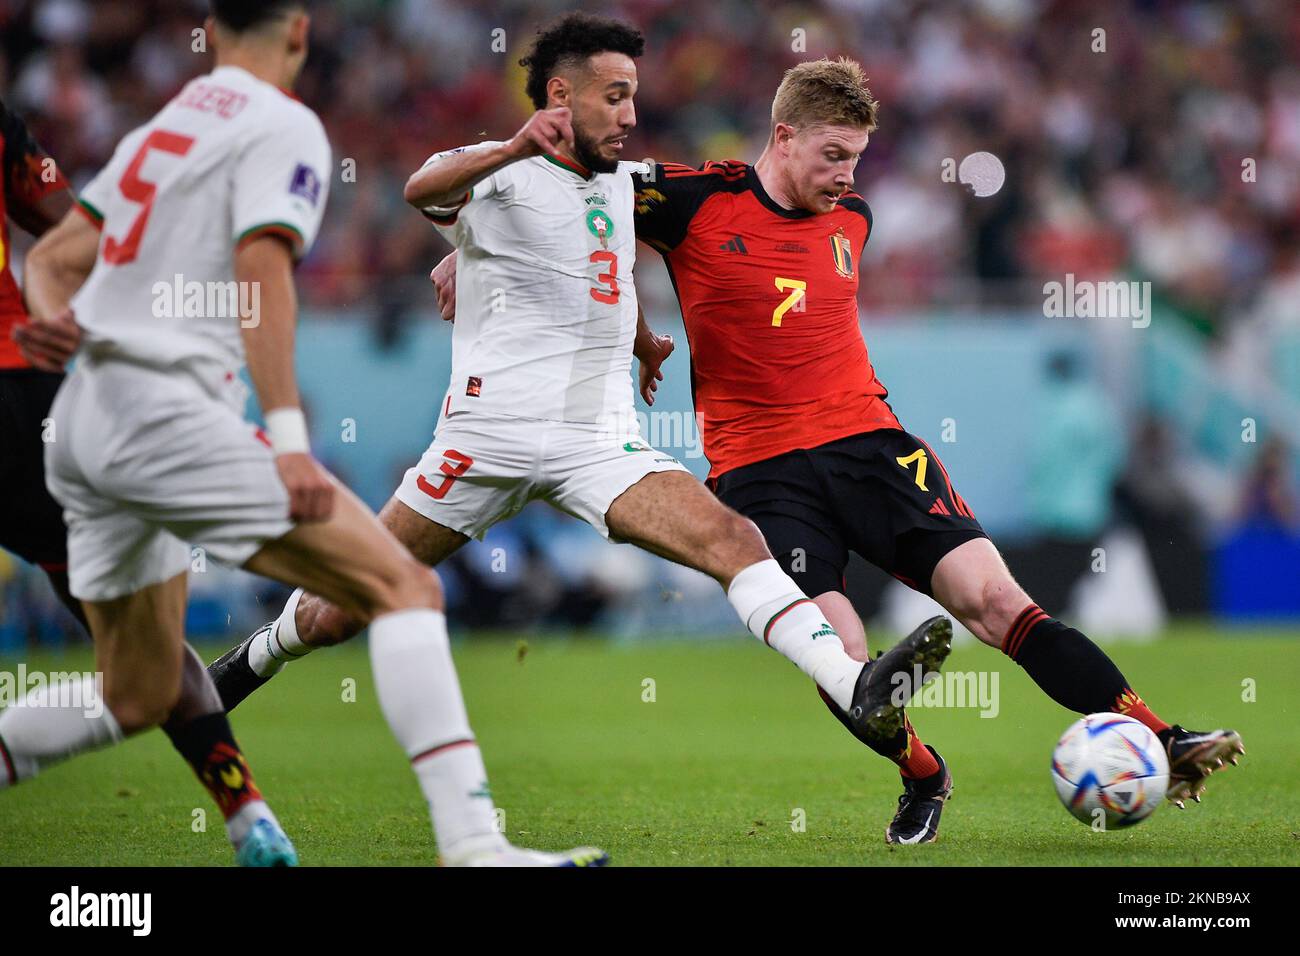 DOHA, QATAR - NOVEMBER 27: Kevin De Bruyne of Belgium battles for the ball with Noussair Mazraoui of Morocco during the Group F - FIFA World Cup Qatar 2022 match between Belgium and Morocco at the Al Thumama Stadium on November 27, 2022 in Doha, Qatar (Photo by Pablo Morano/BSR Agency) Stock Photo